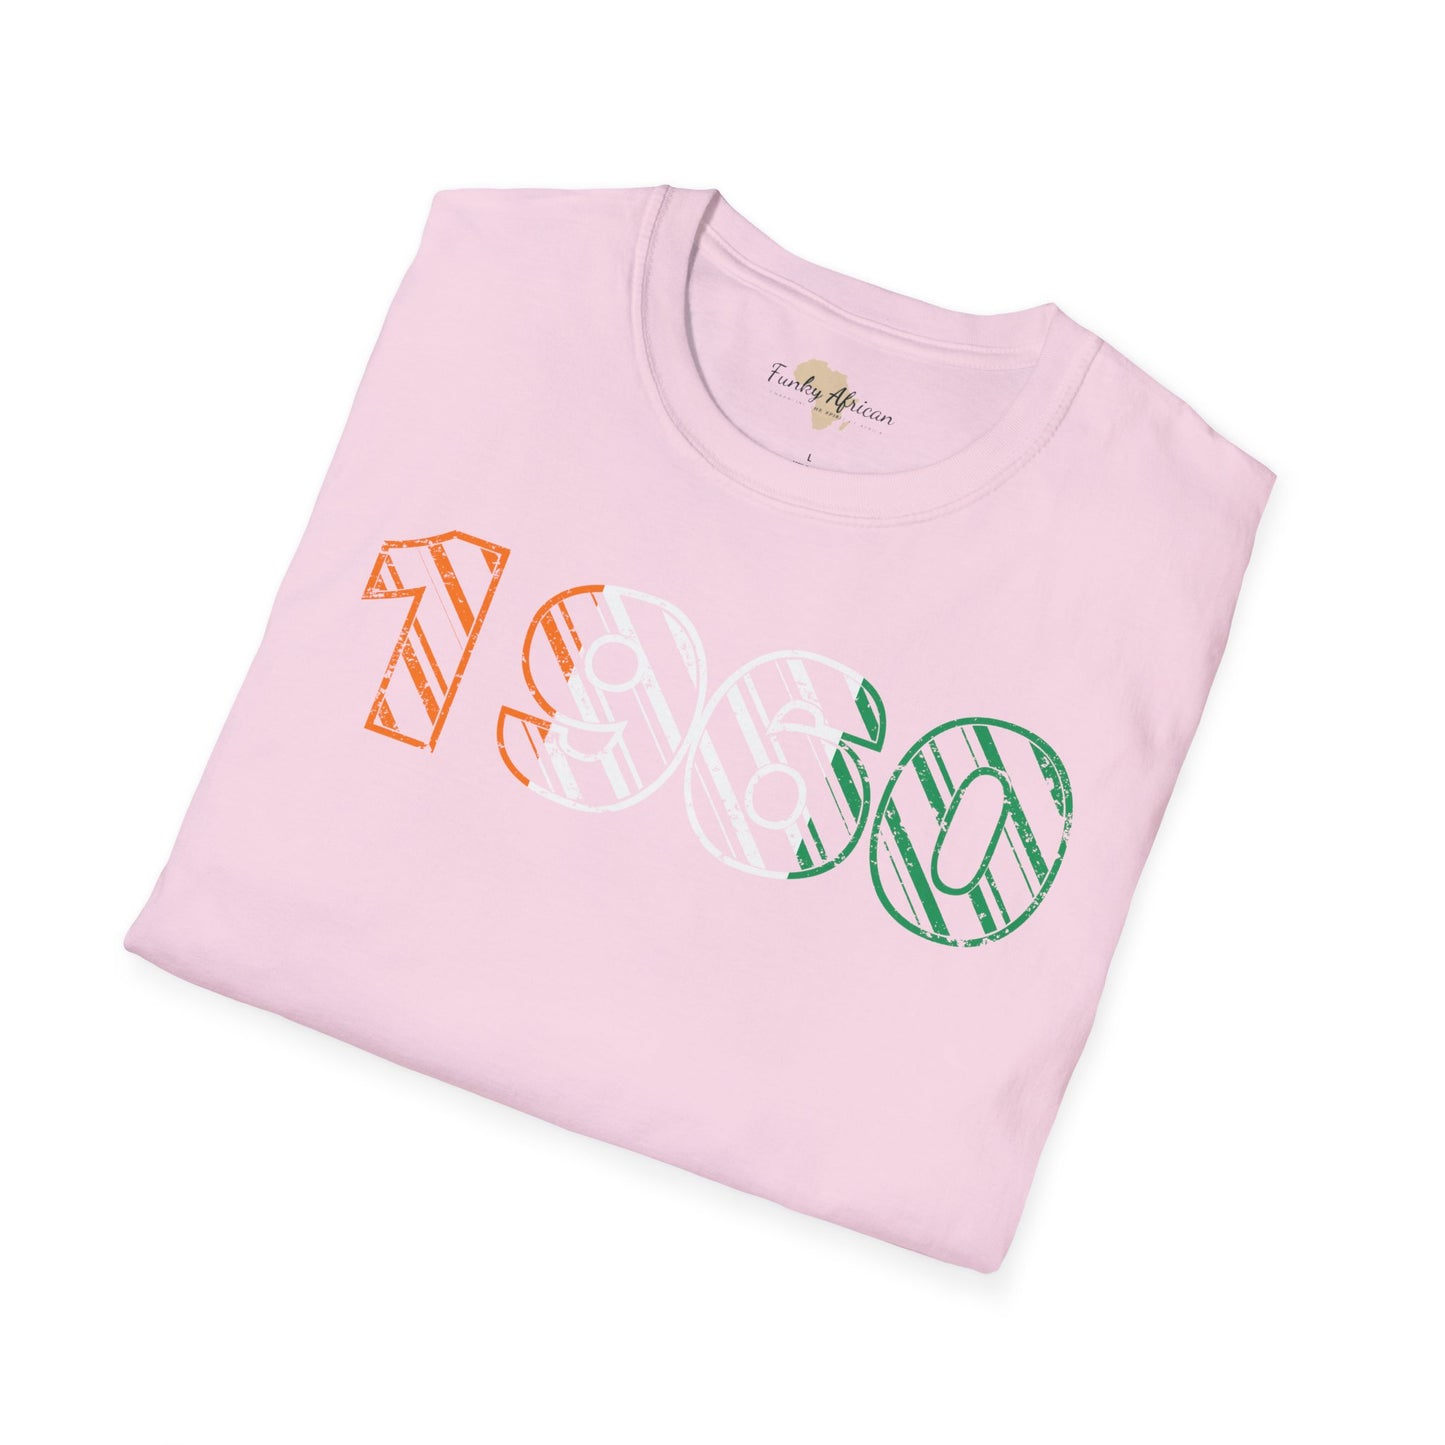 Côte d'Ivoire year unisex softstyle tee